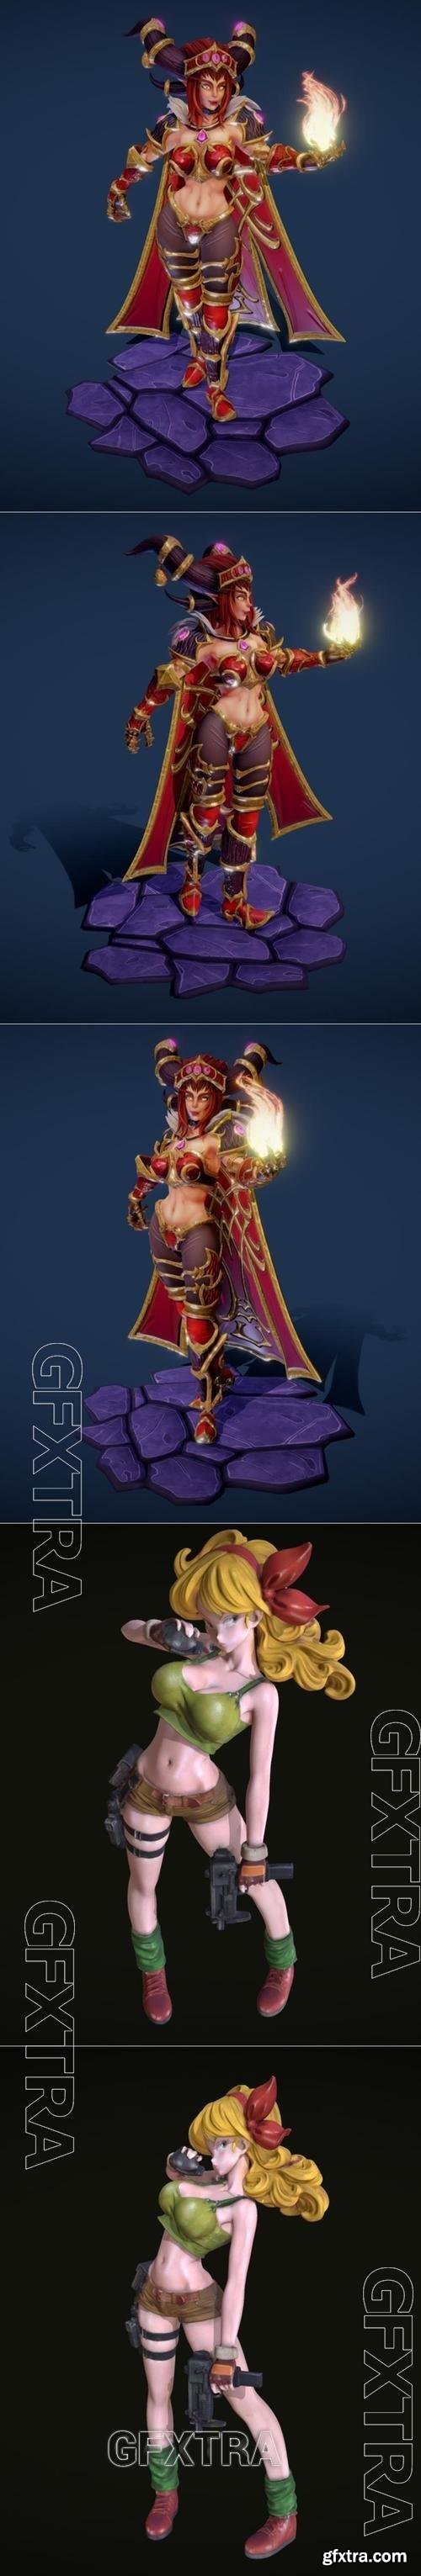 Alexstrasza from World Of Warcraft Fan Art and Dragonball Lunchi 3D